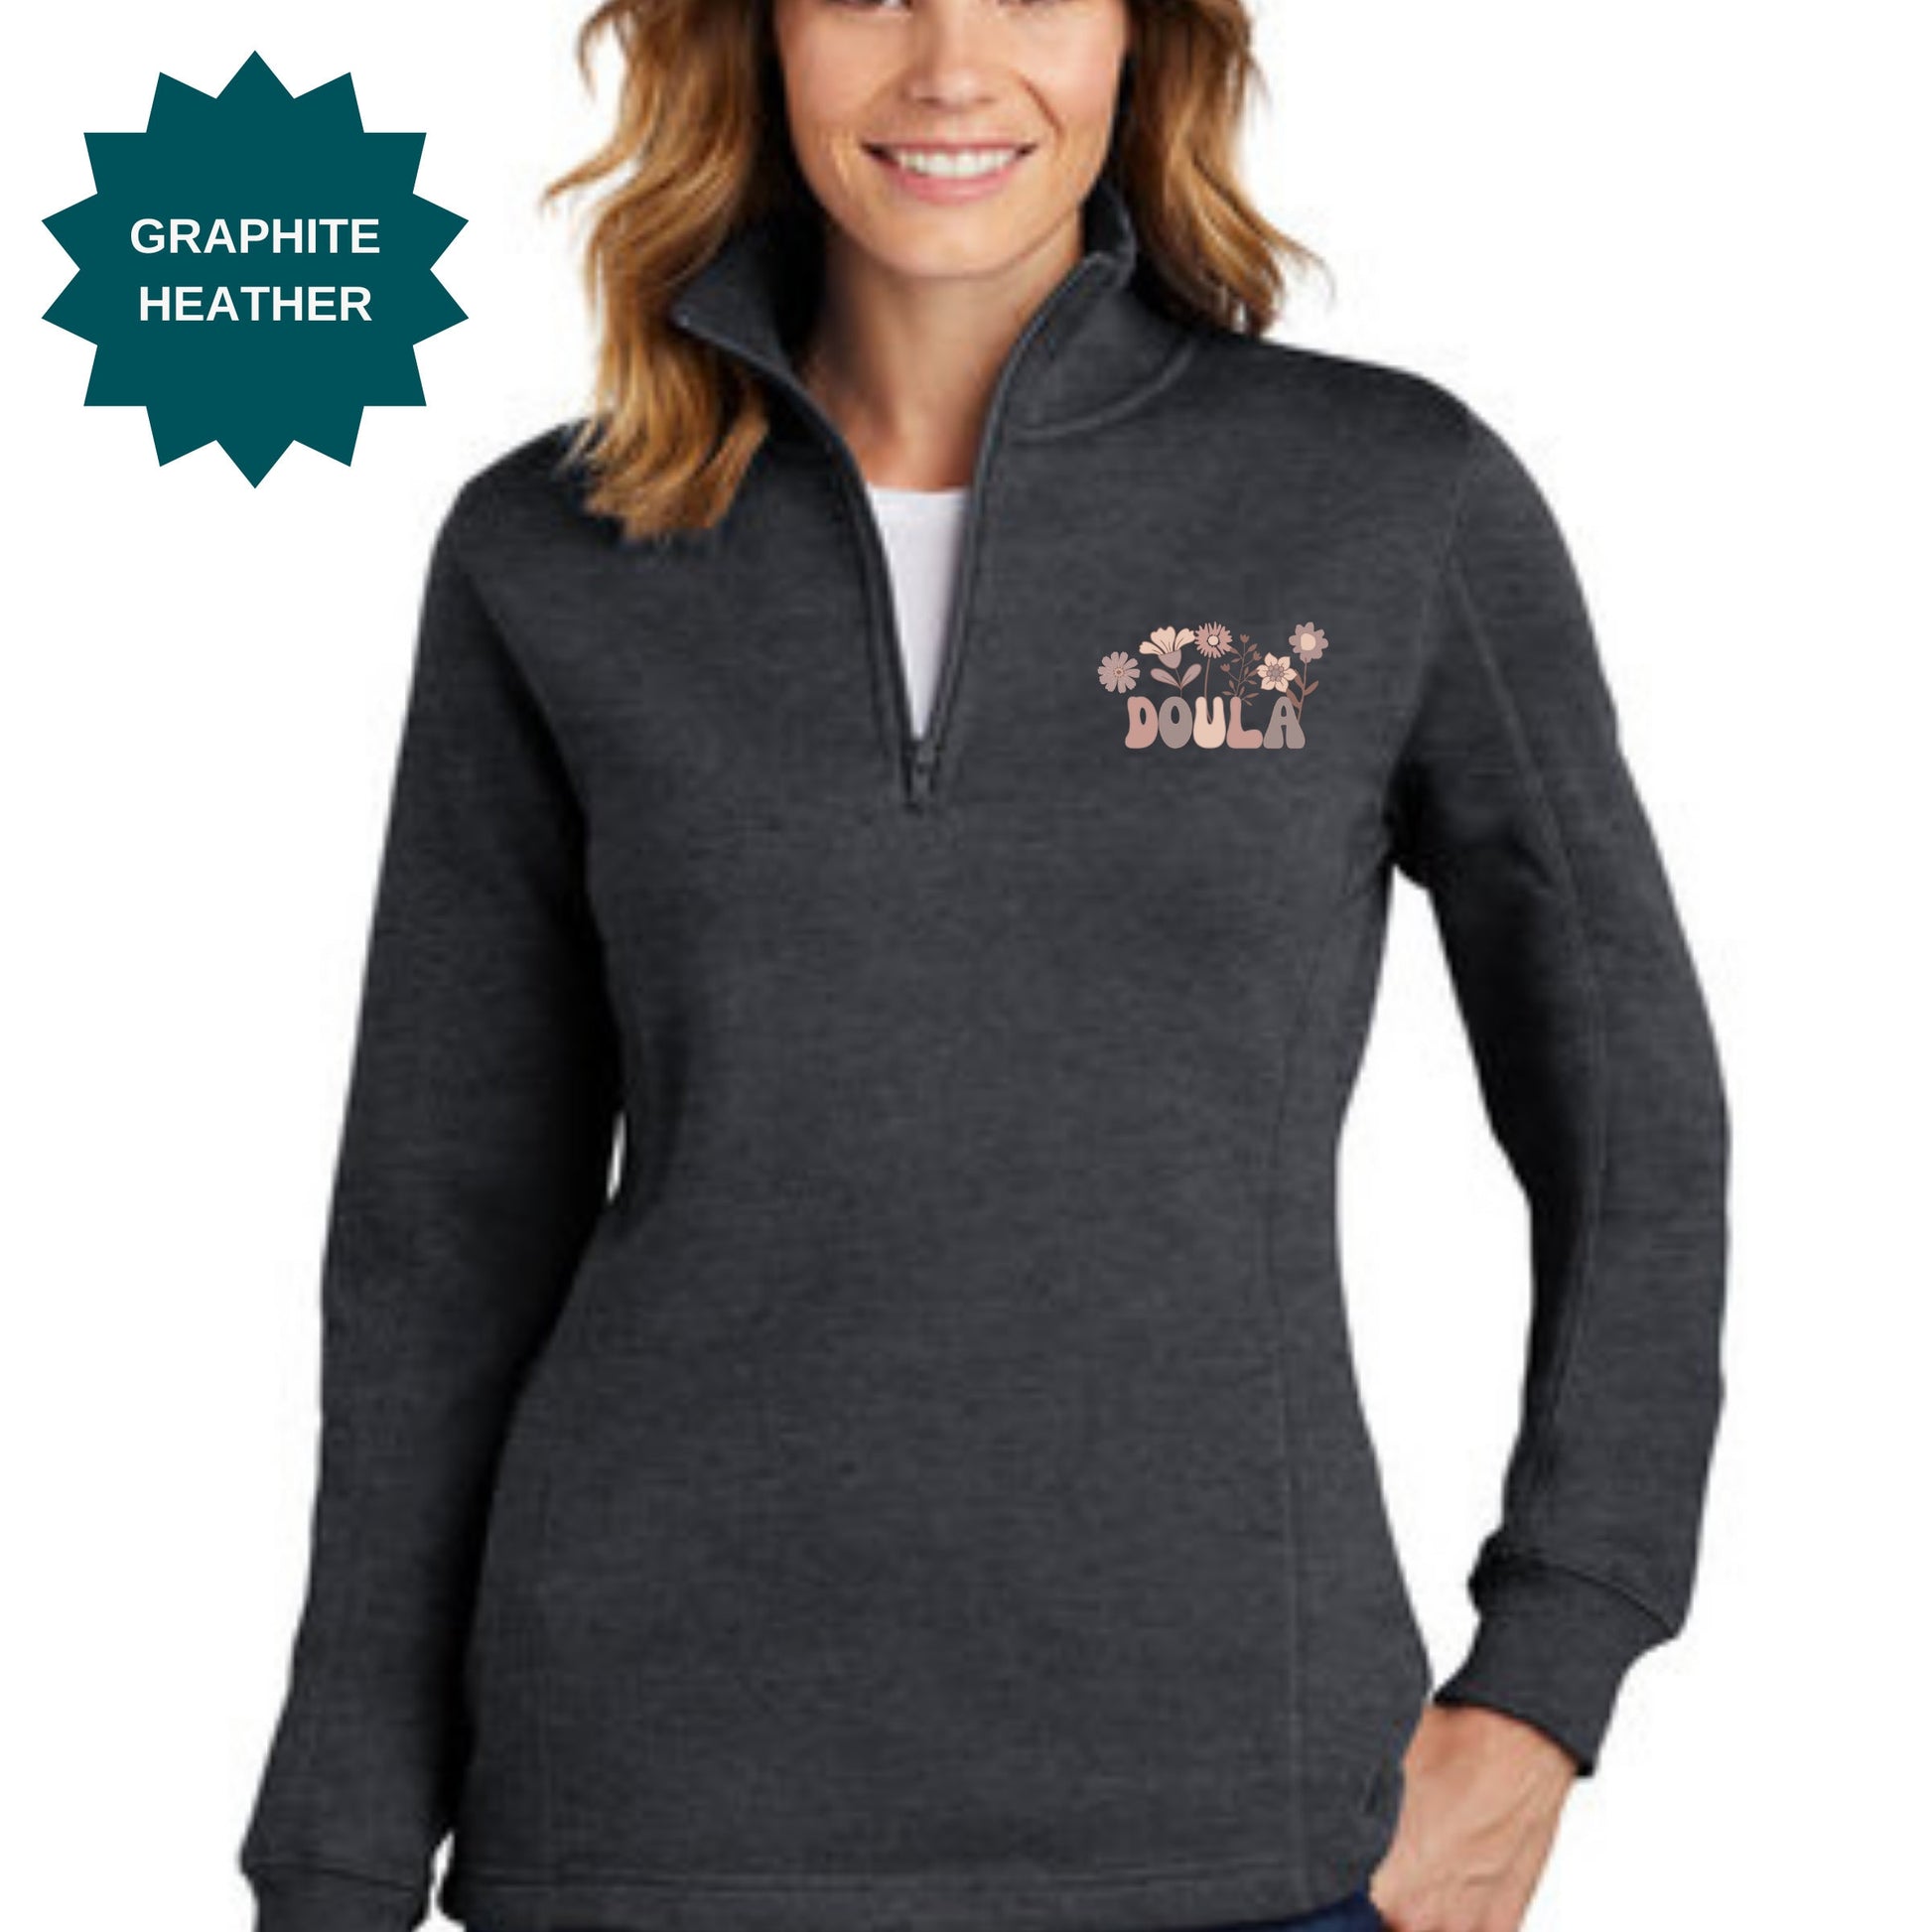 Doula Sweatshirt, Doula Gift, Doula Business, Womens 1/4 Zip LST253 Pullover